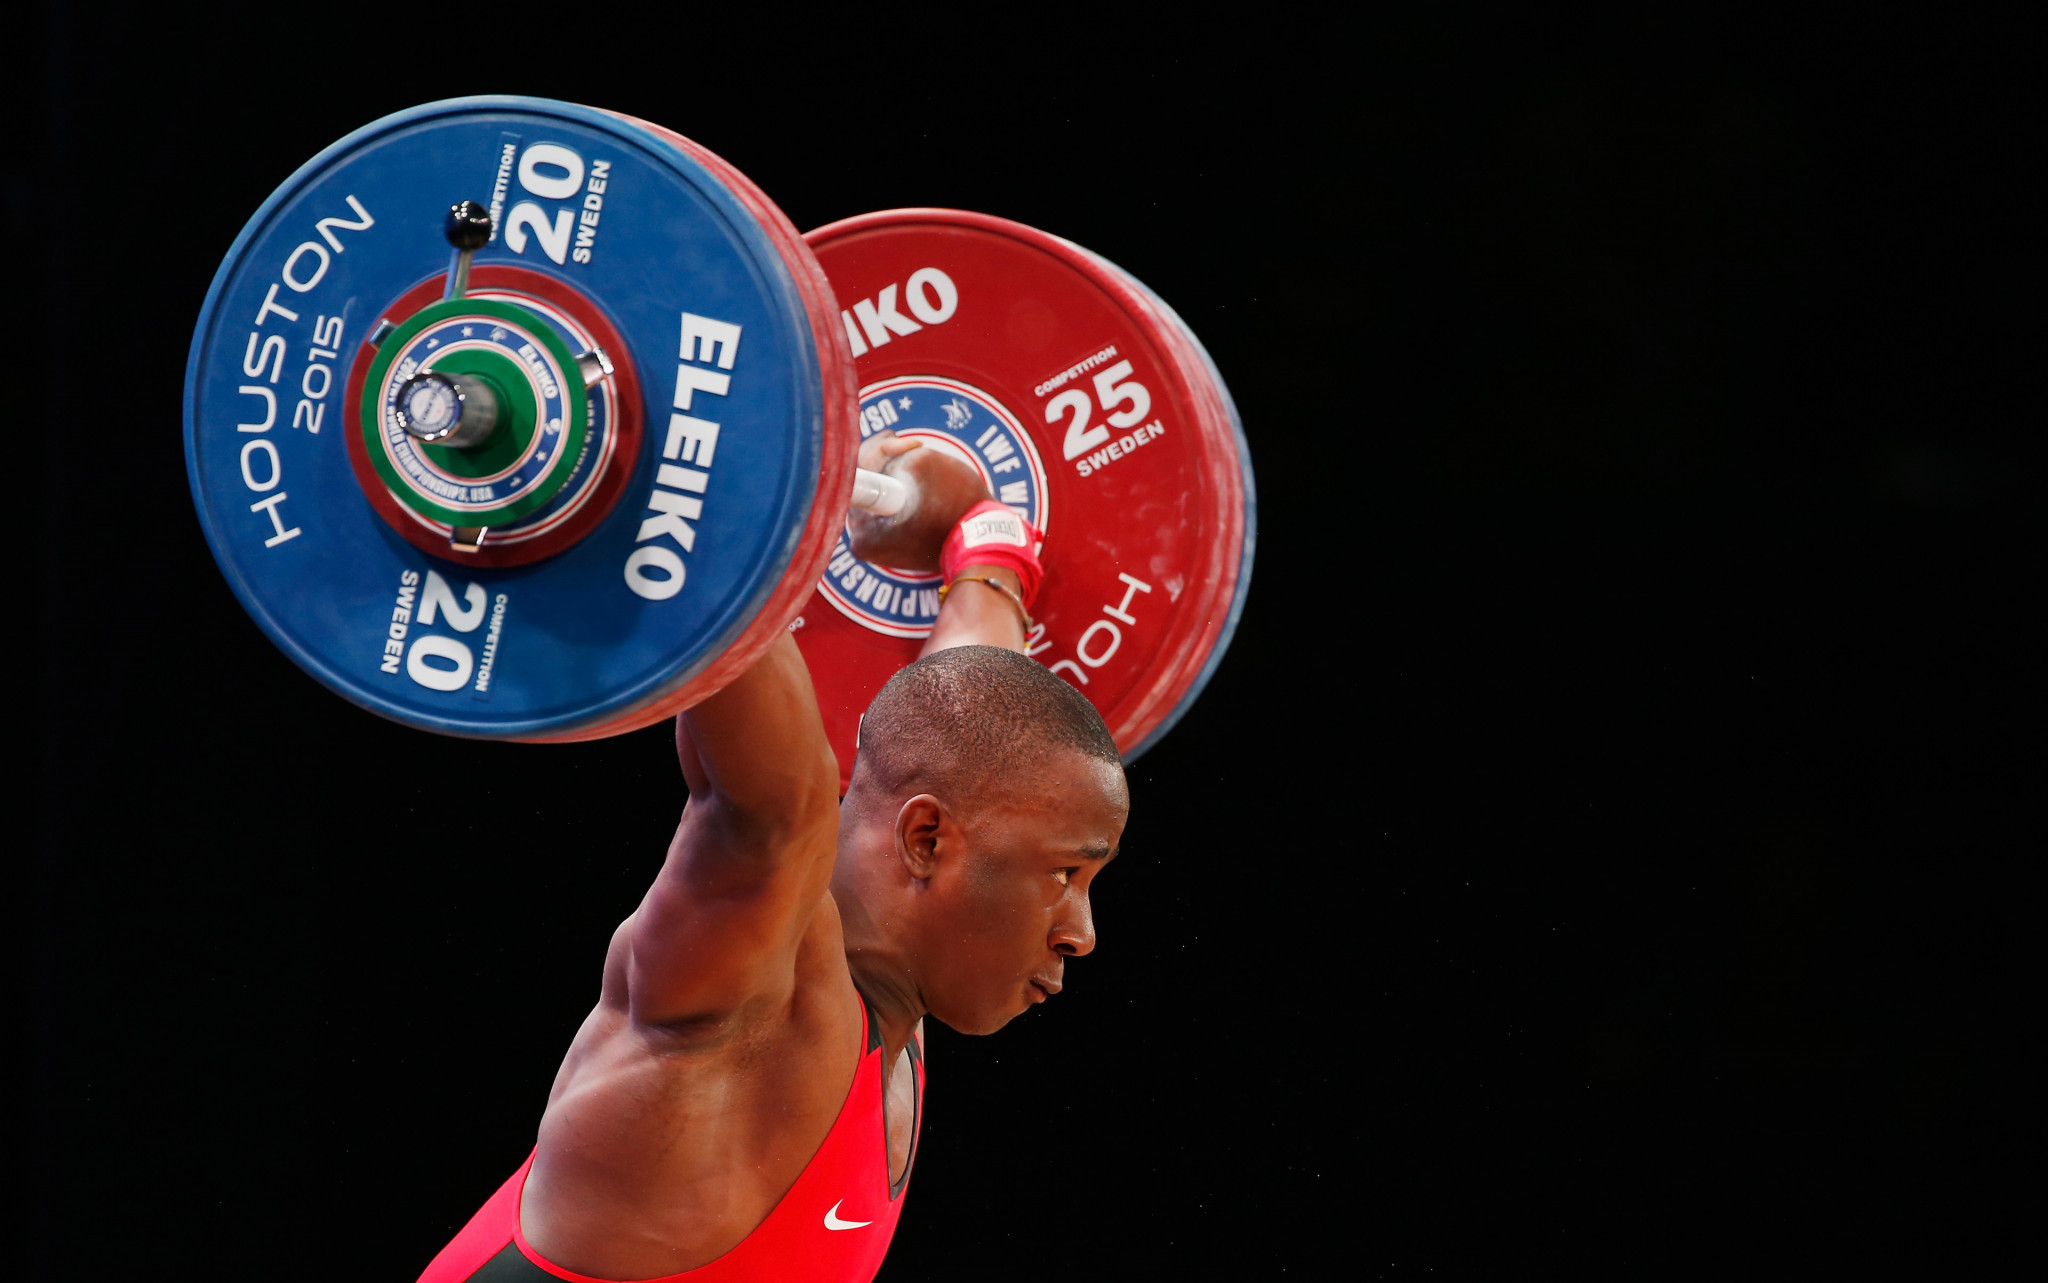 Lesman Paredes broke a world record as he won the men's 96kg world title in Tashkent ©Getty Images